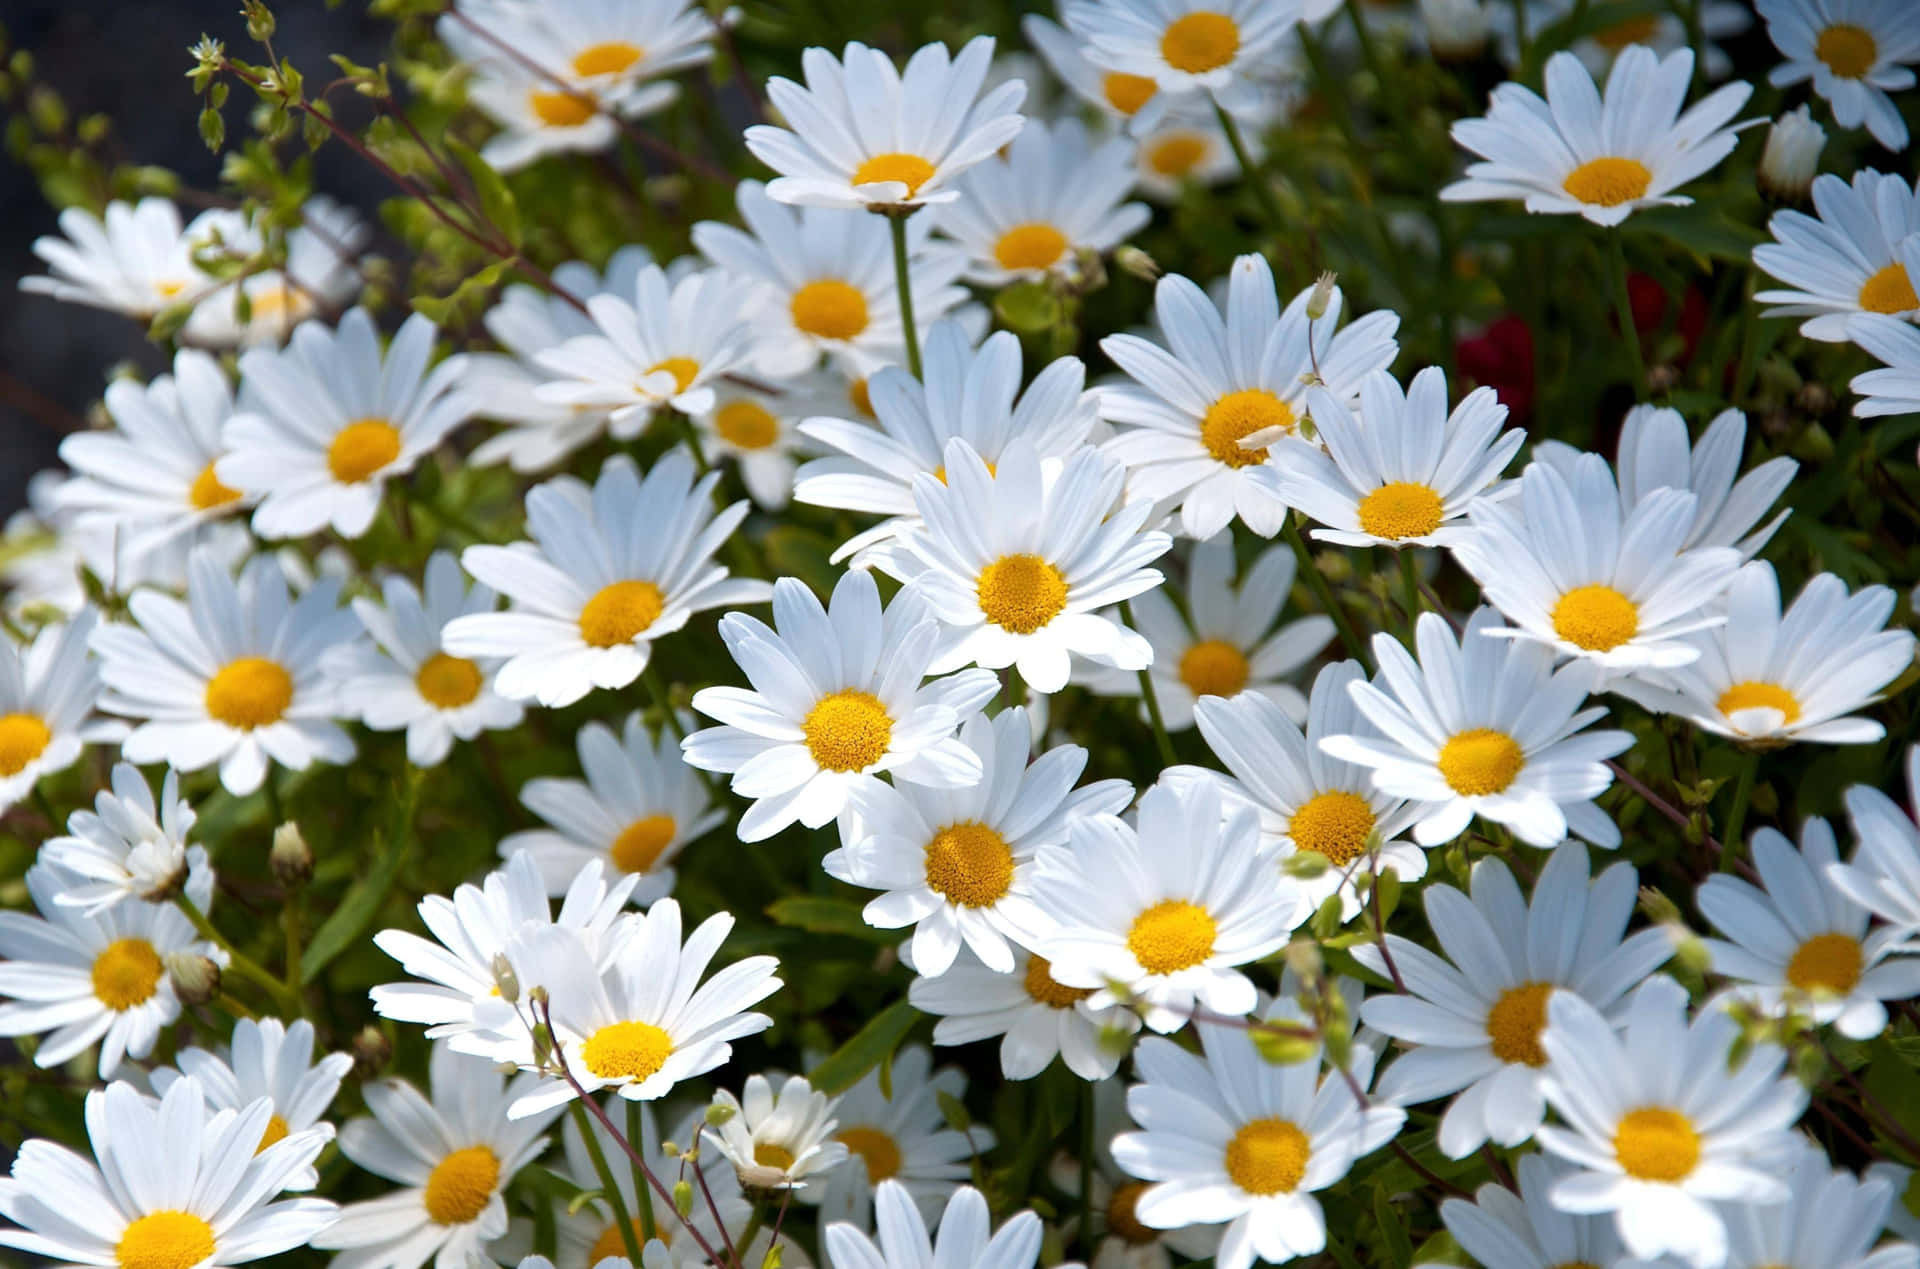 Blossoming Daisy in Its Natural Glory